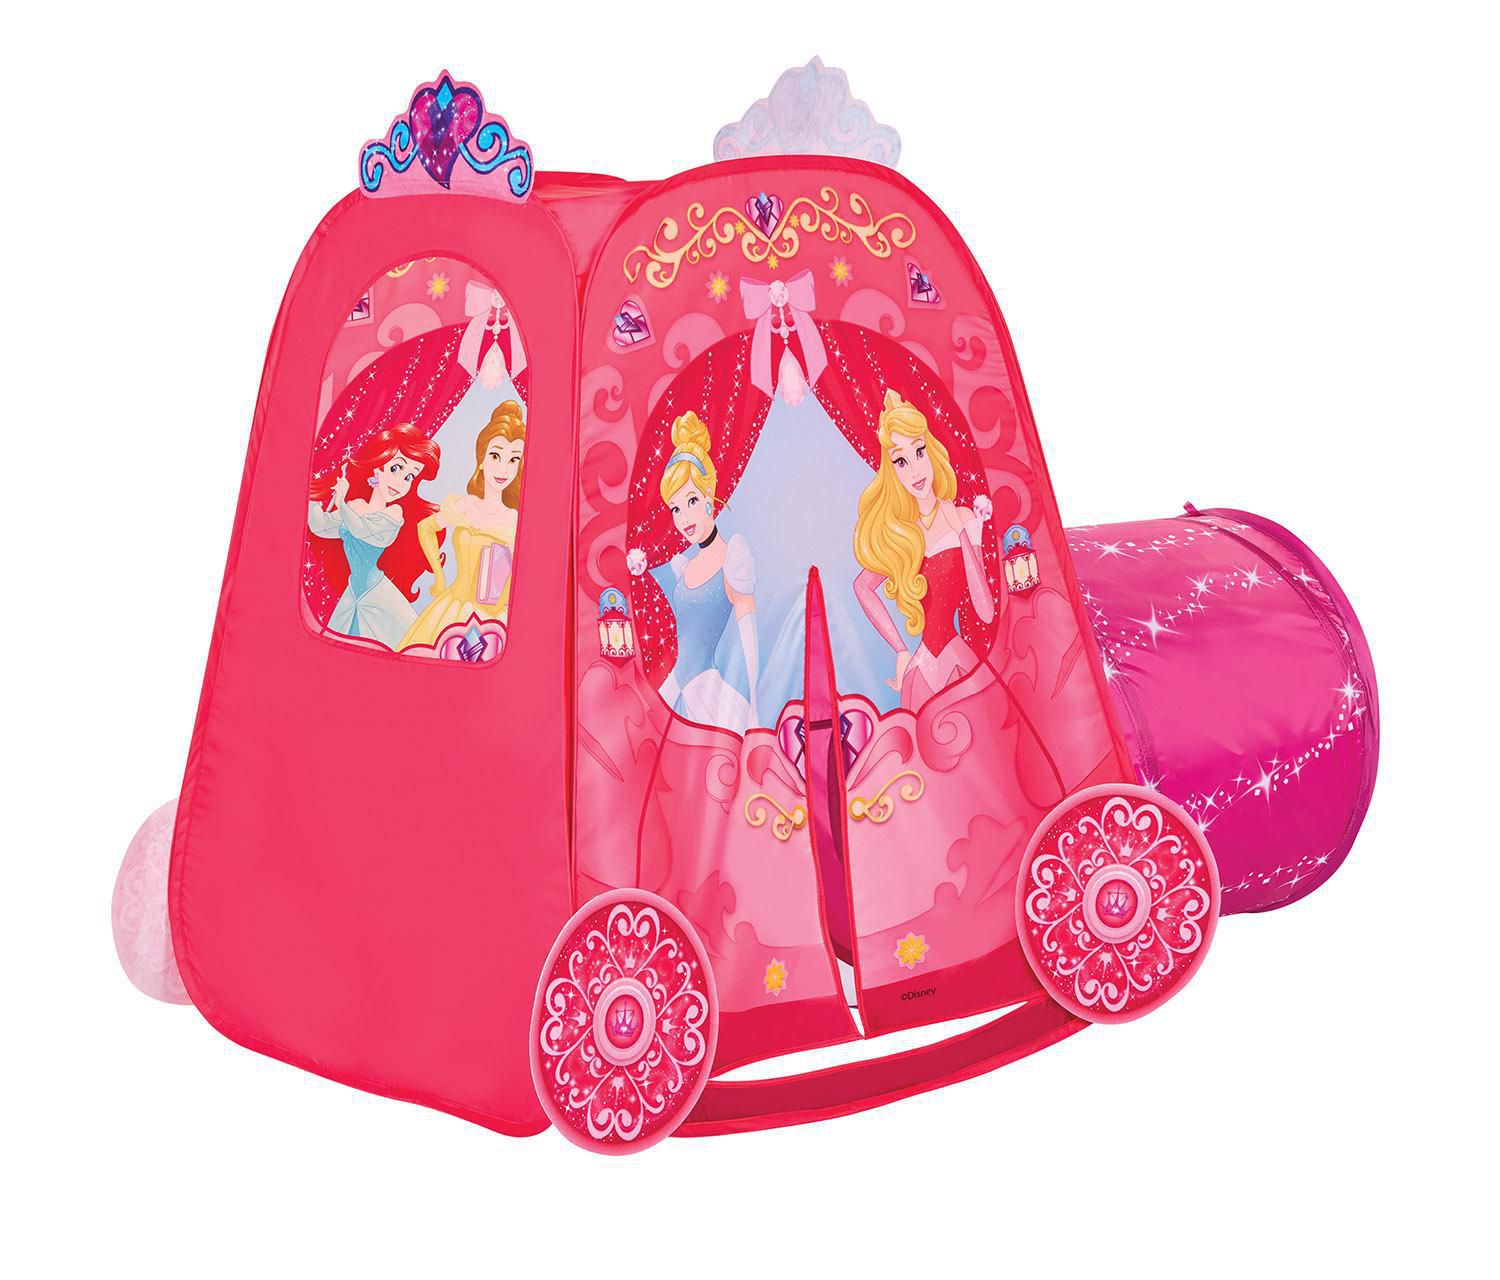 Disney Princess Explore Your World Character Tent and